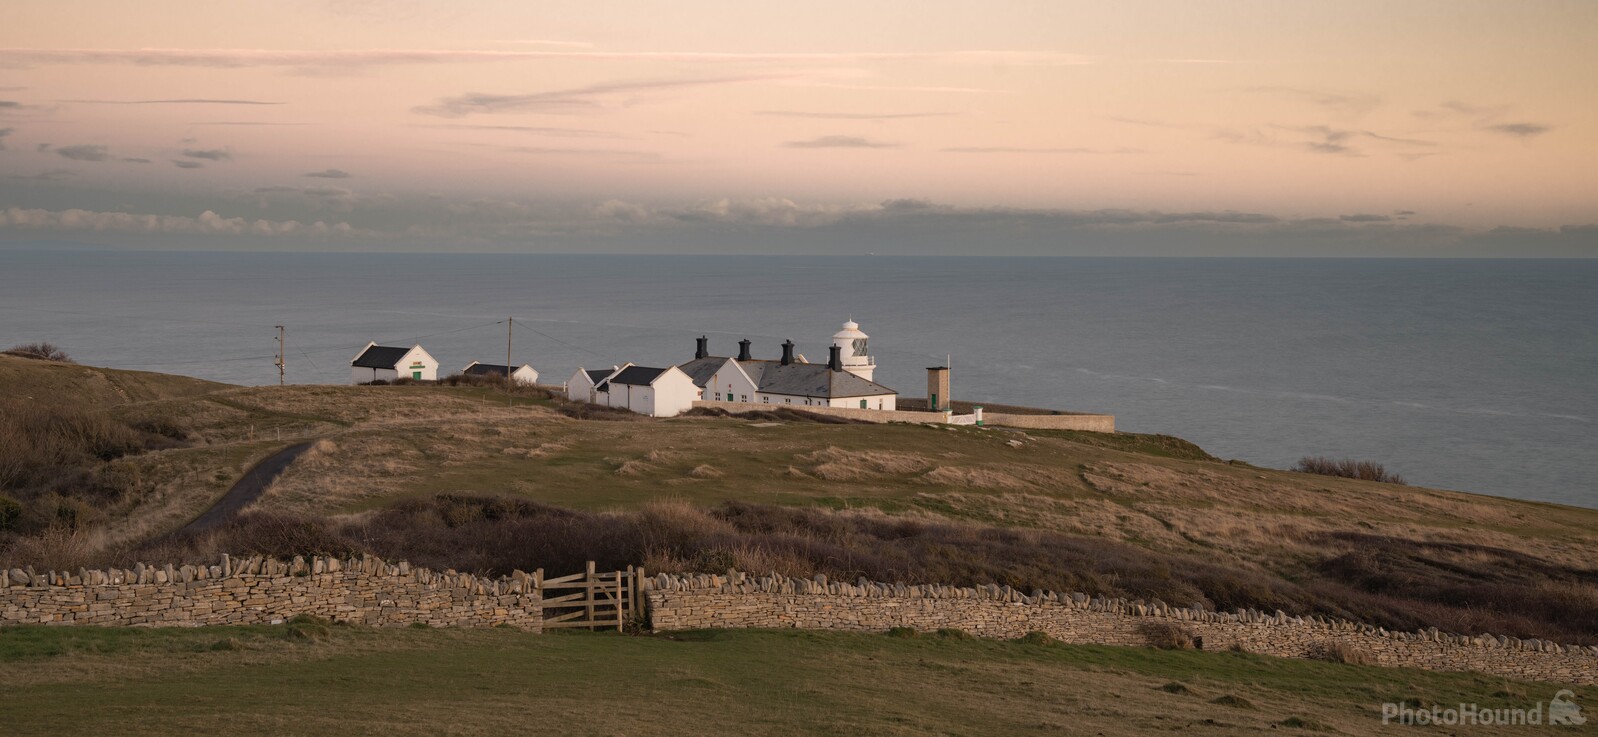 Image of Durlston Country Park by michael bennett